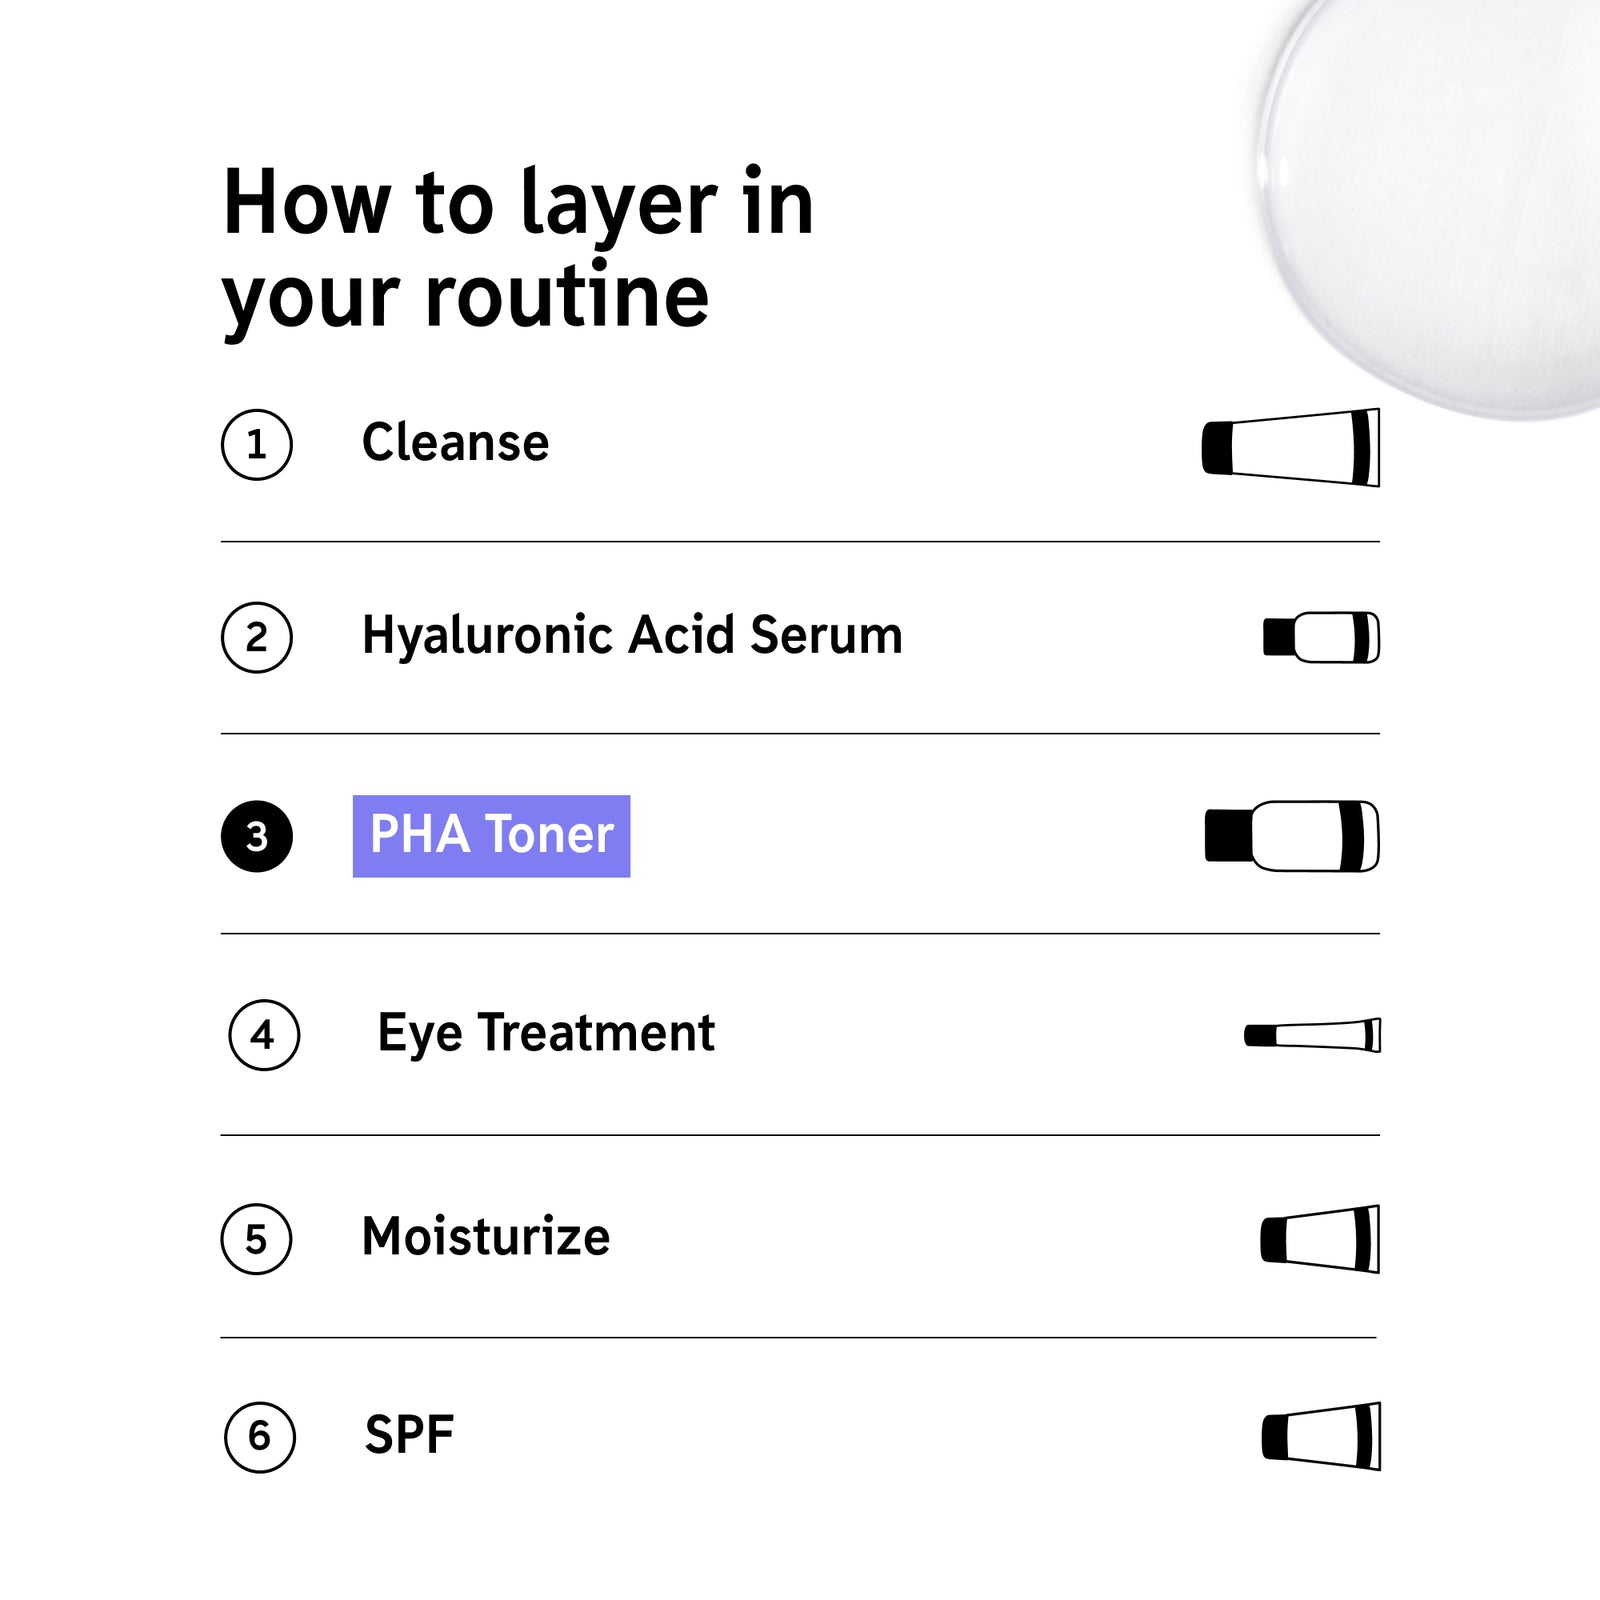 How to layer PHA Toner in your routine